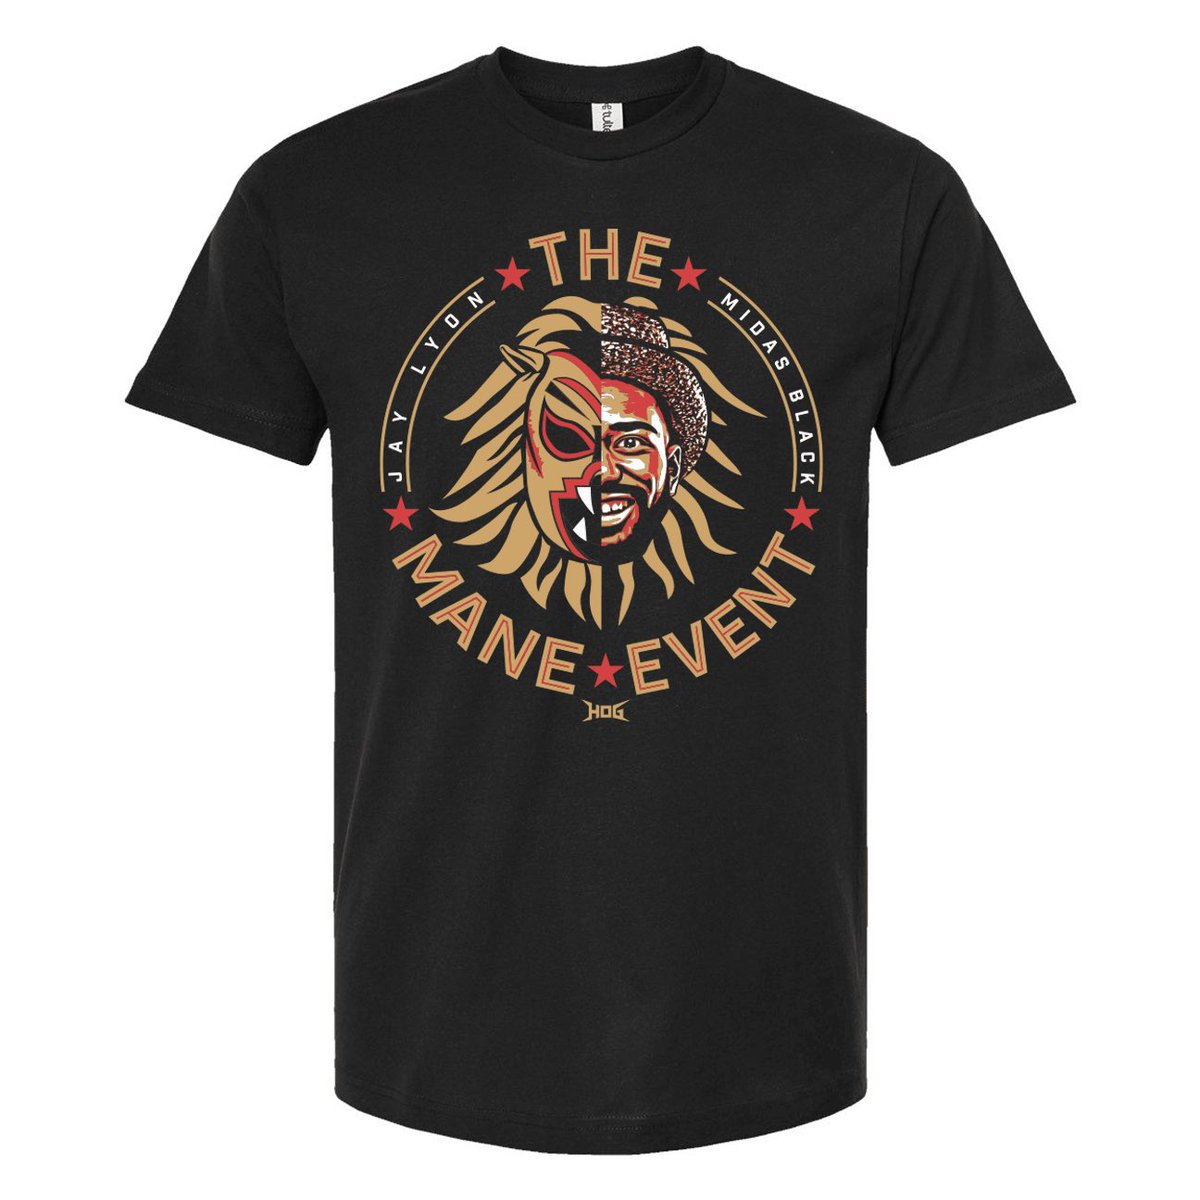 🚨GIVEAWAY 🚨

Retweet, like, and follow for a chance to win our The Mane Event Split Faces T-Shirt.

In less than two weeks they battle the MCMG at #Bewarethefury so make sure you represent the greatest show on earth. 

#HOG #HOGWrestling #Prowrestling #themaneevent #Giveaway